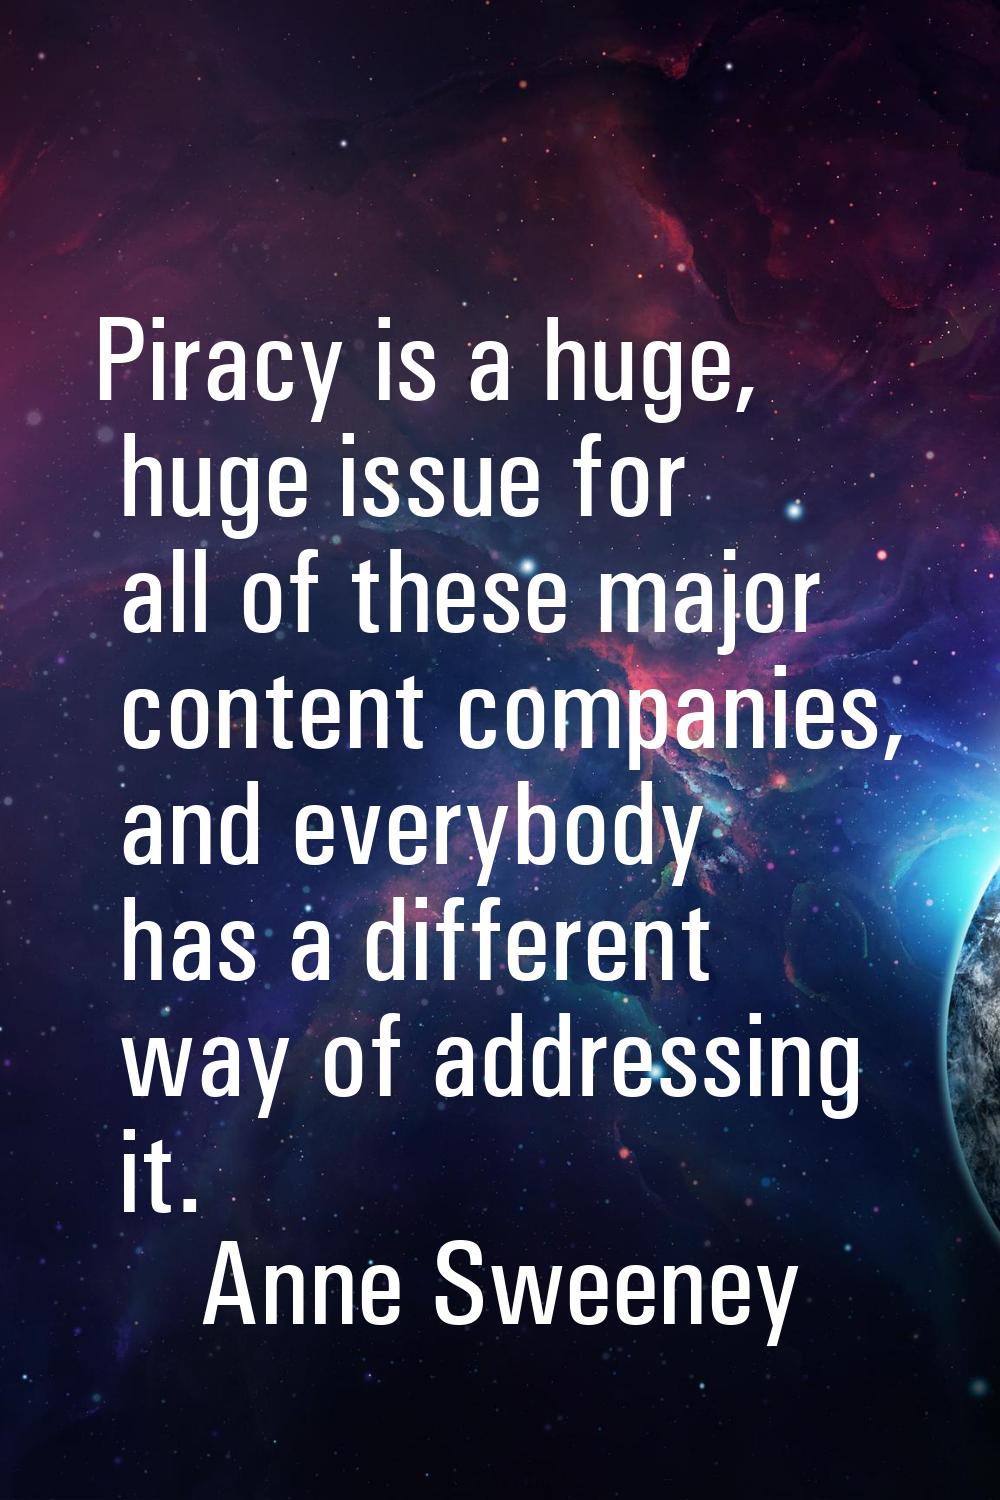 Piracy is a huge, huge issue for all of these major content companies, and everybody has a differen